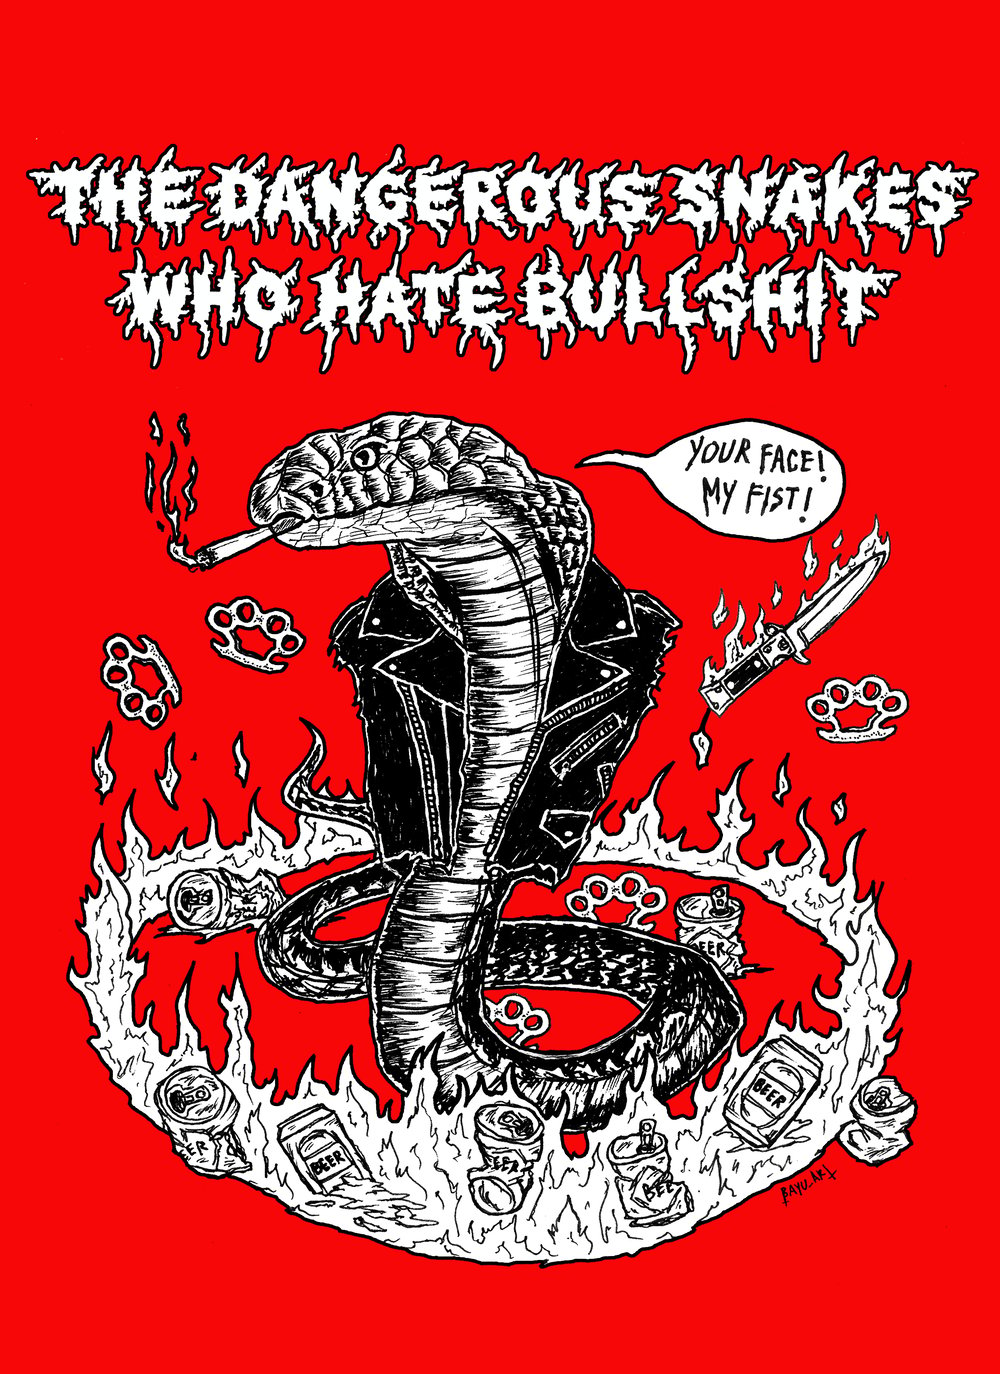 Dangerous Snakes Who Hate Bullshit "YOUR FACE! MY FIST!" shirt by artist Bayu Satria